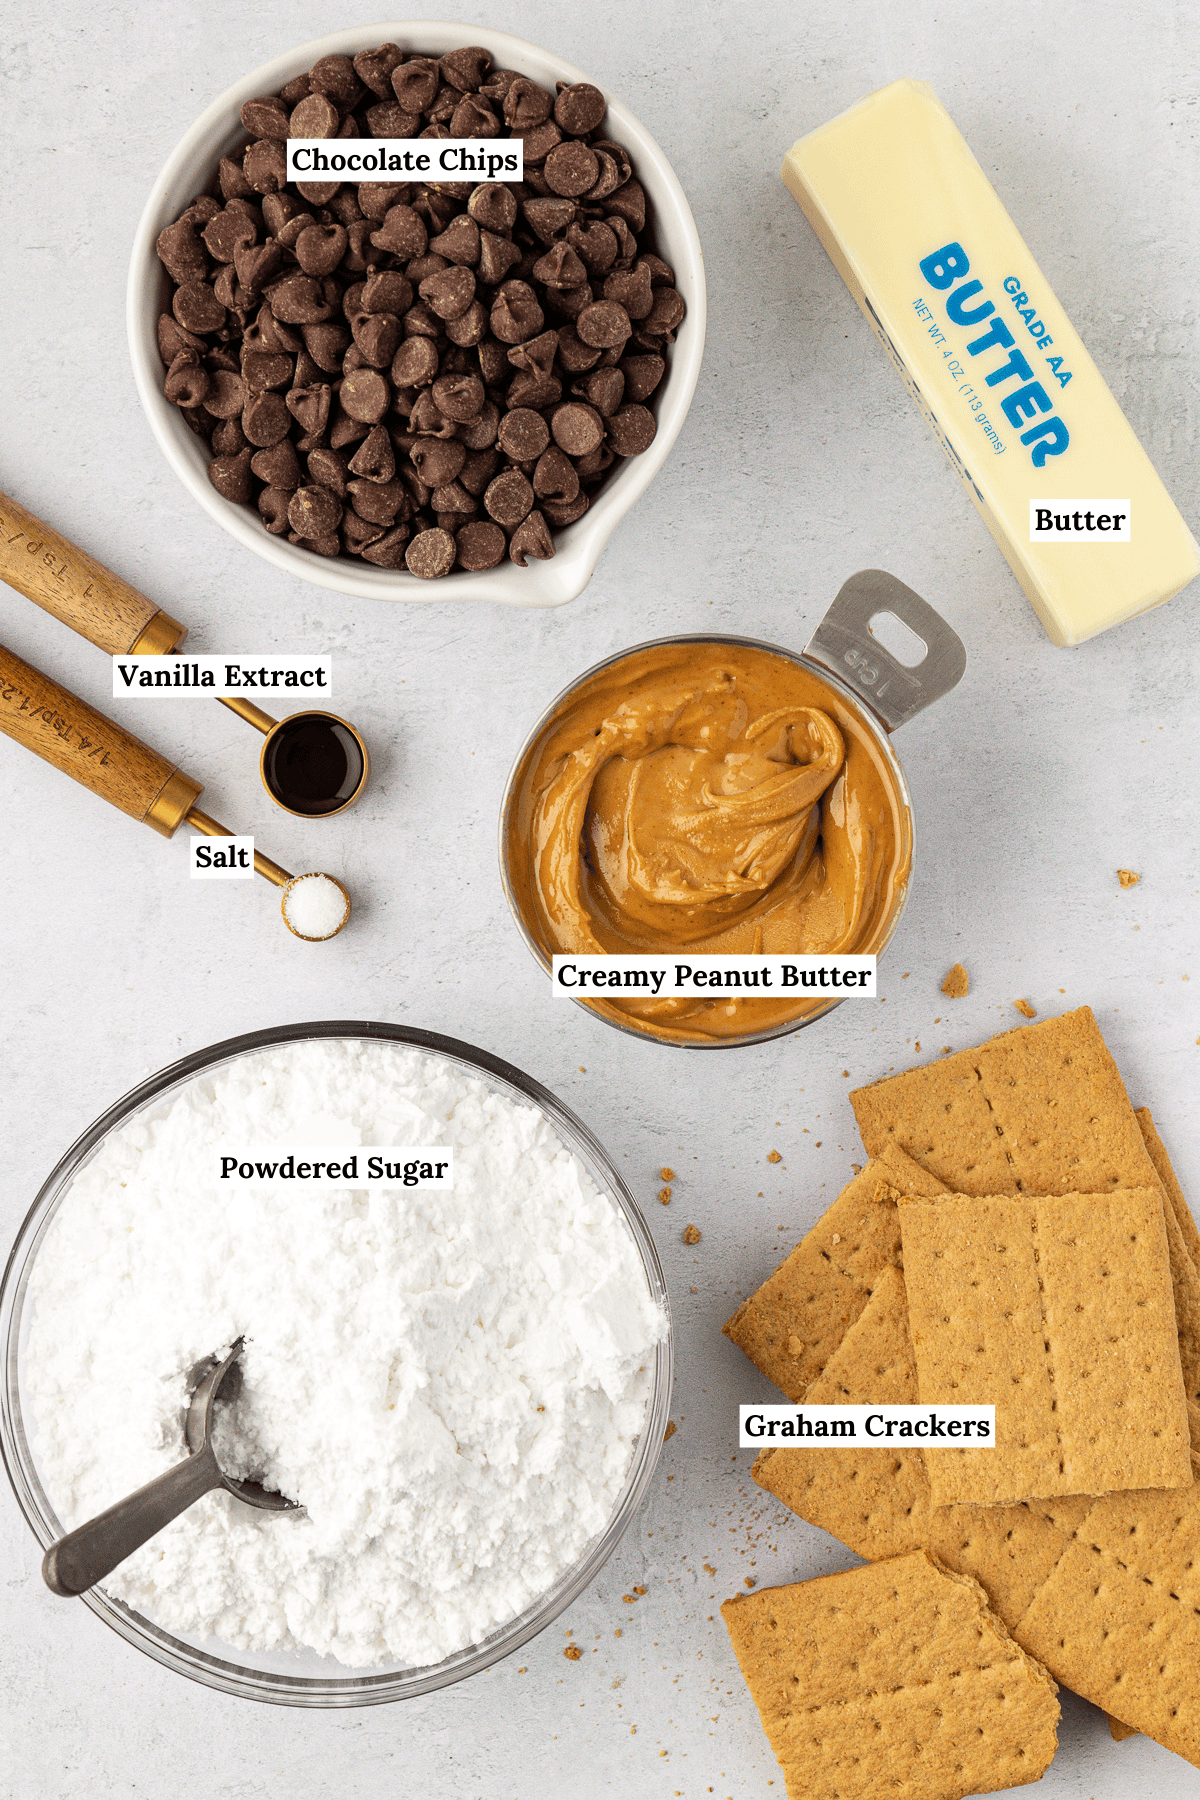 over head view of the ingredients for peanut butter bars including chocolate chips, a stick of butter, creamy peanut butter, vanilla extract, salt, powdered sugar, and graham crackers